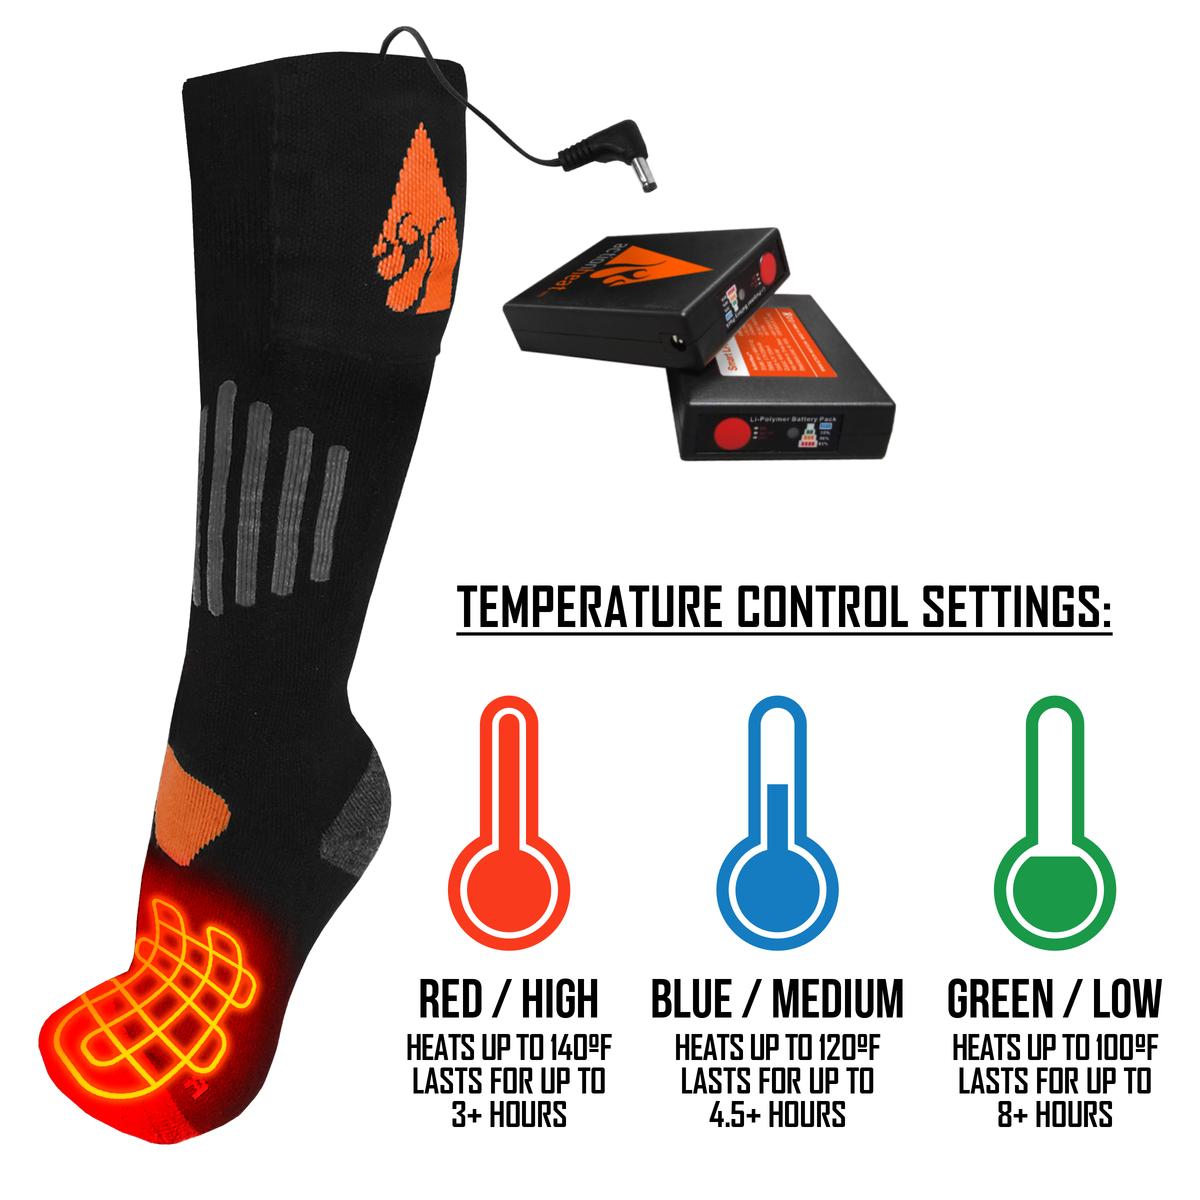 ActionHeat 3V Wool Rechargeable Battery Heated Socks 1.0 - Size